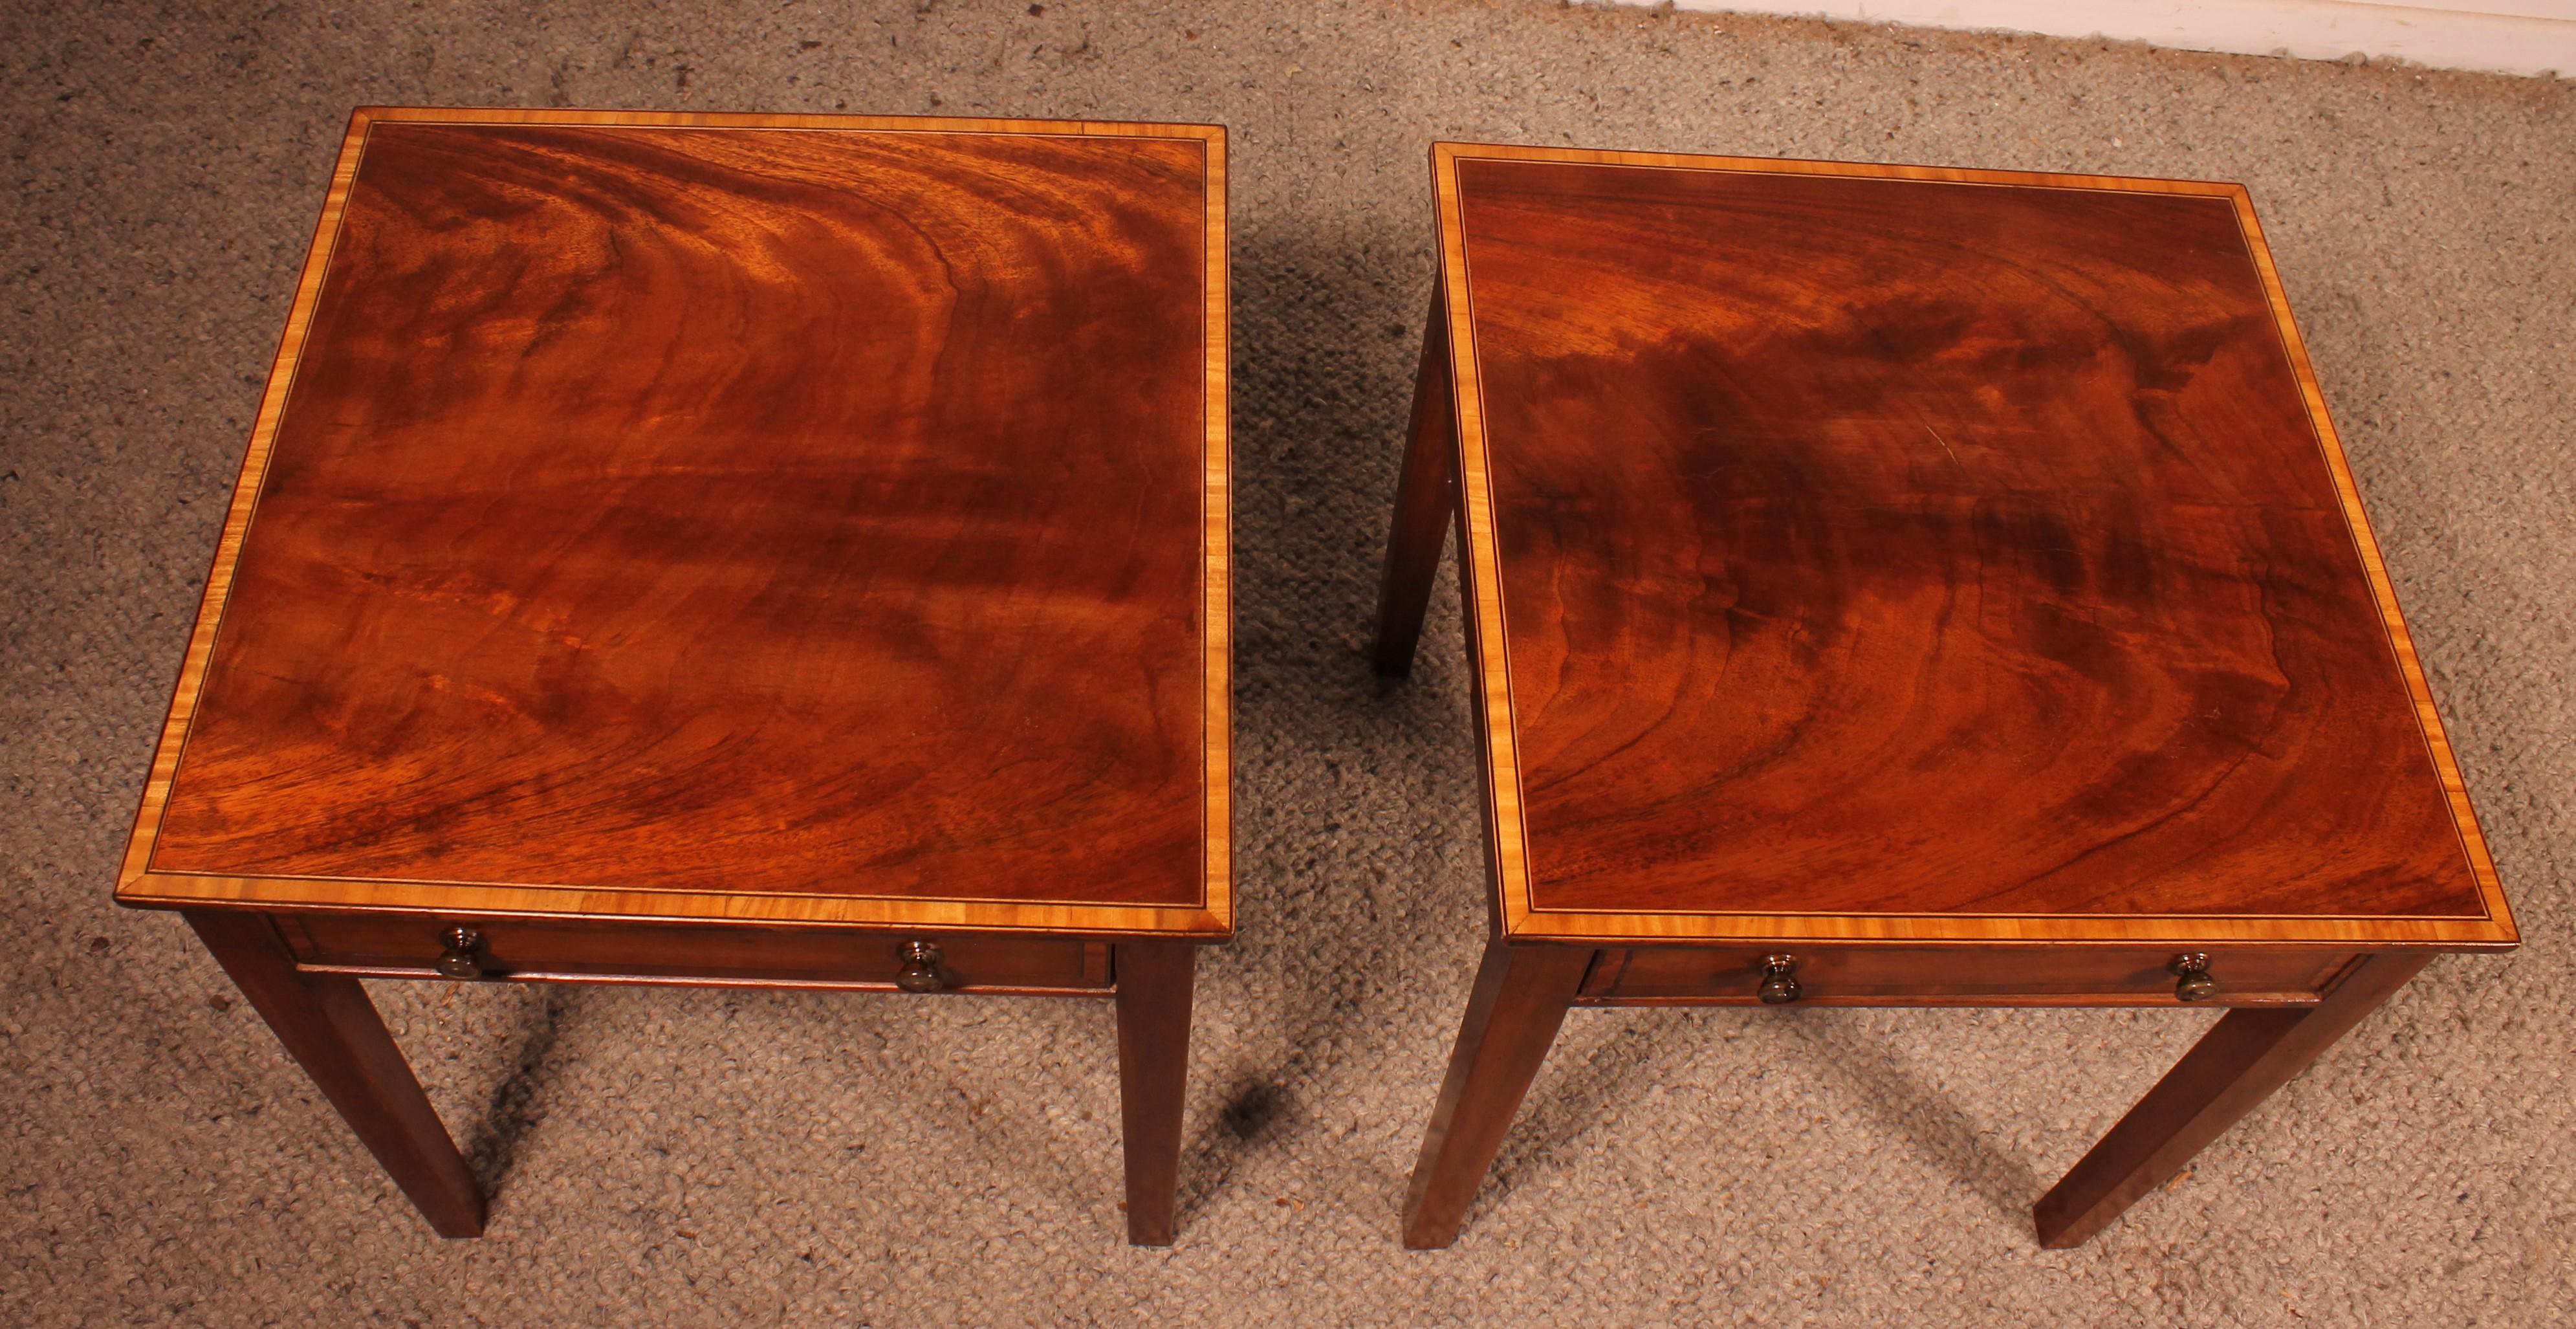 Pair Of Mahogany Bedside Tables From The Early 19th Century In Good Condition For Sale In Brussels, Brussels